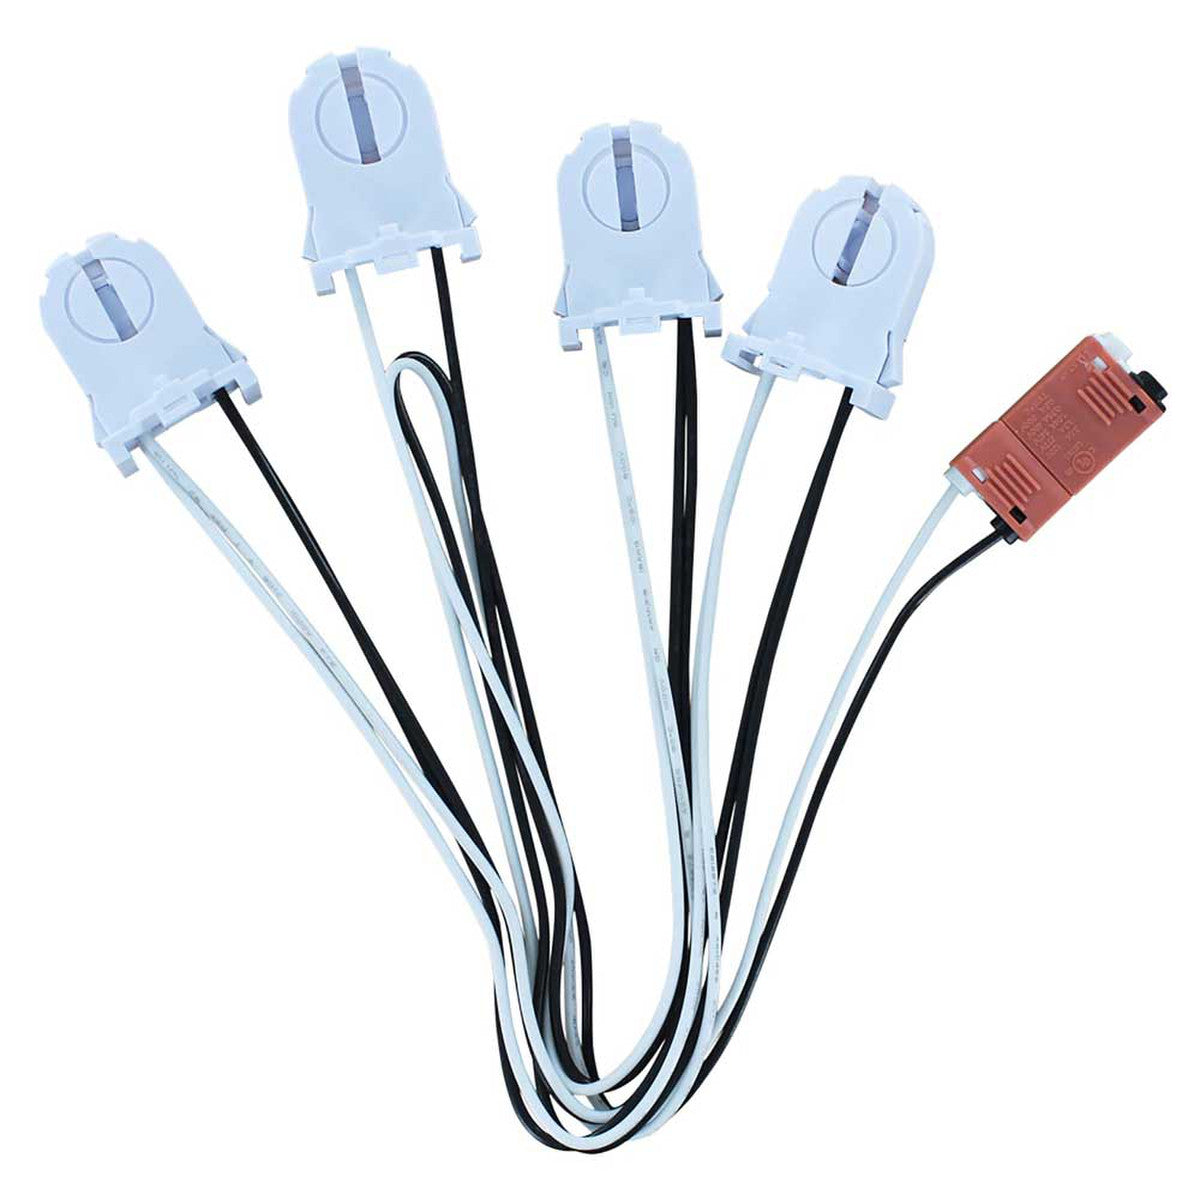 4-Lamp Wiring Harness with Short Non-shunted Sockets for LED Tubes